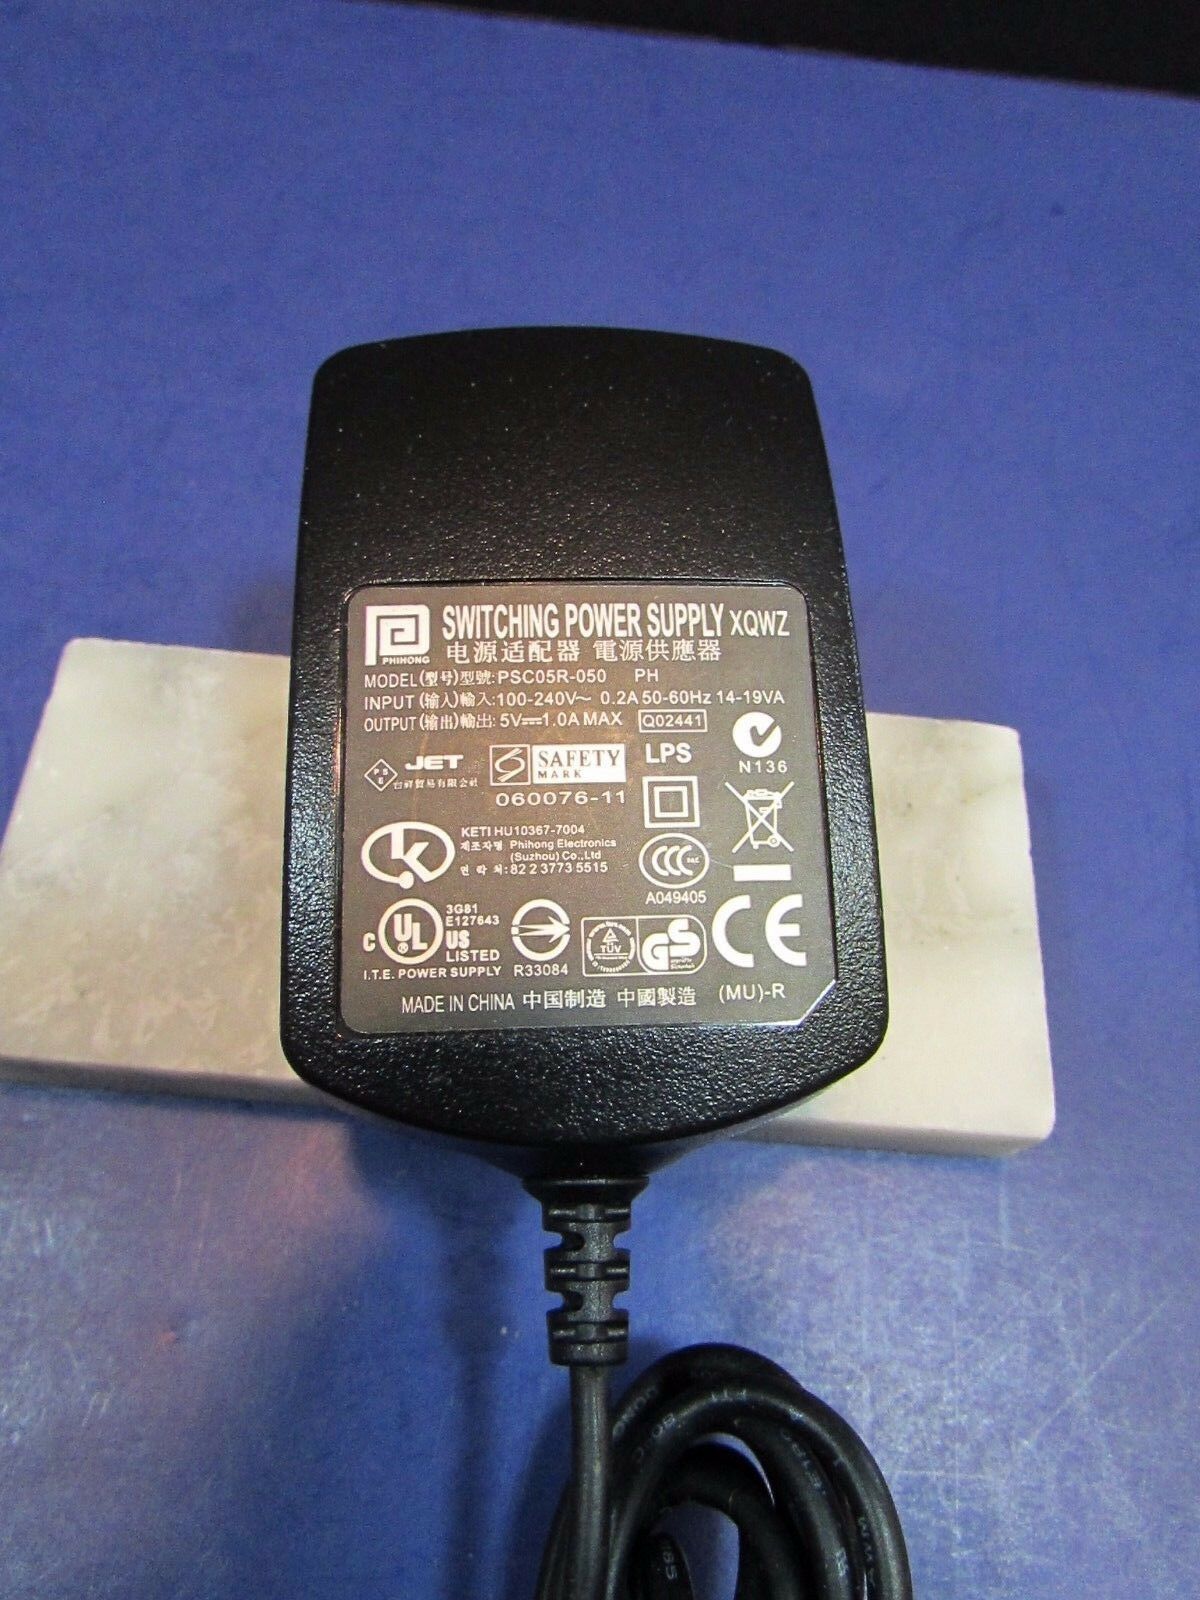 New PHIHONG PSC05R-050 5V 1.0A 1A SWITCHING POWER SUPPLY AC ADAPTER